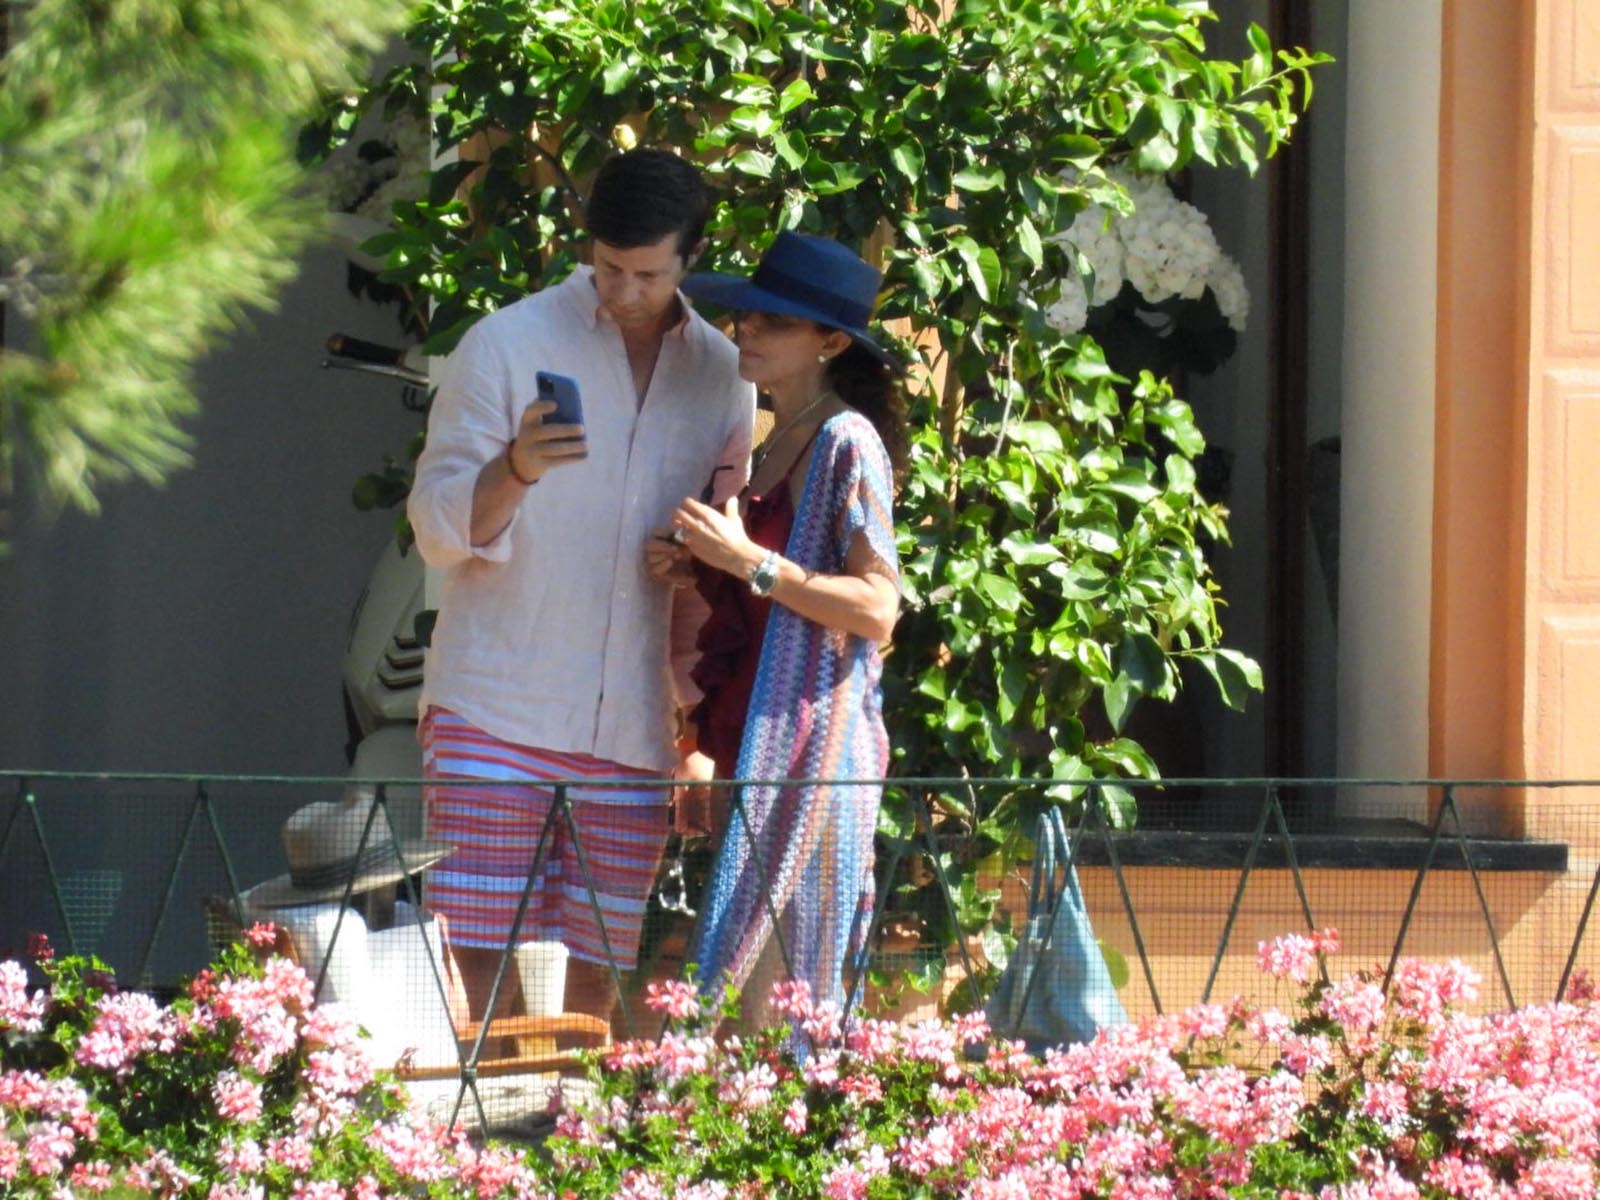 RHONY's Bethenny Frankel and Paul Bernon are seen looking at their phone at their hotel on July 7, 2021, in Italy